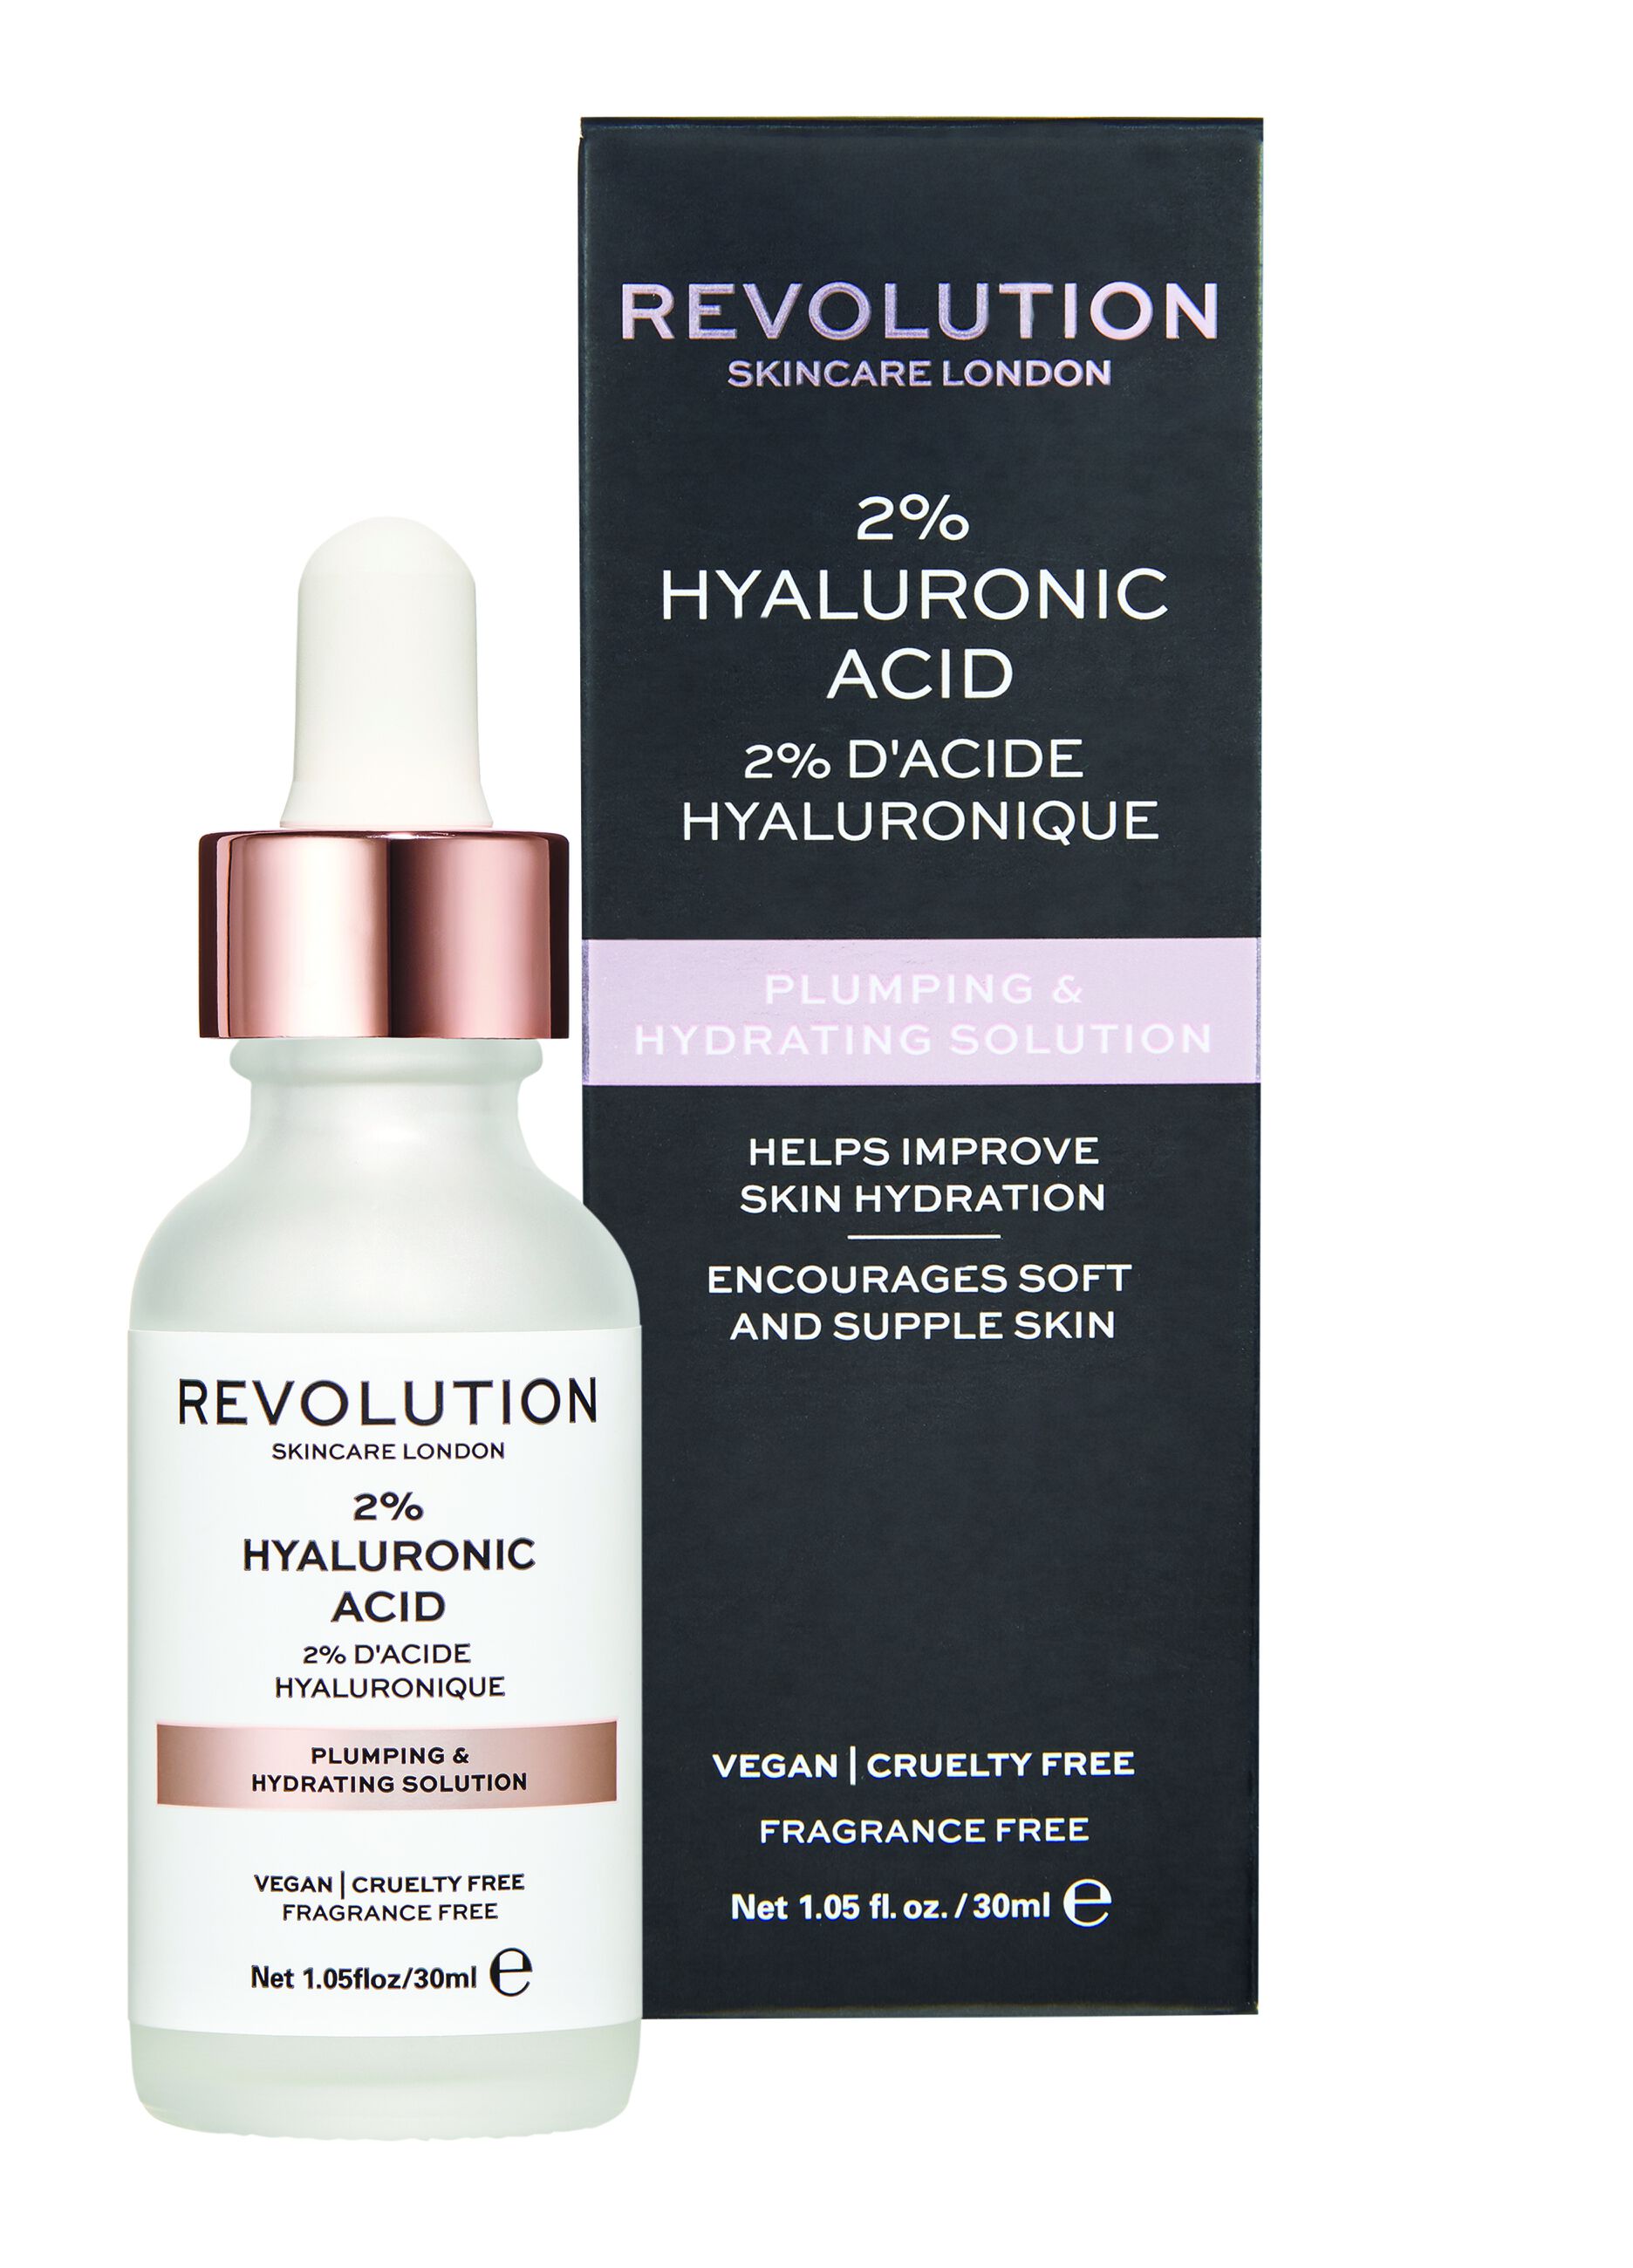 Serum with 2% hyaluronic acid